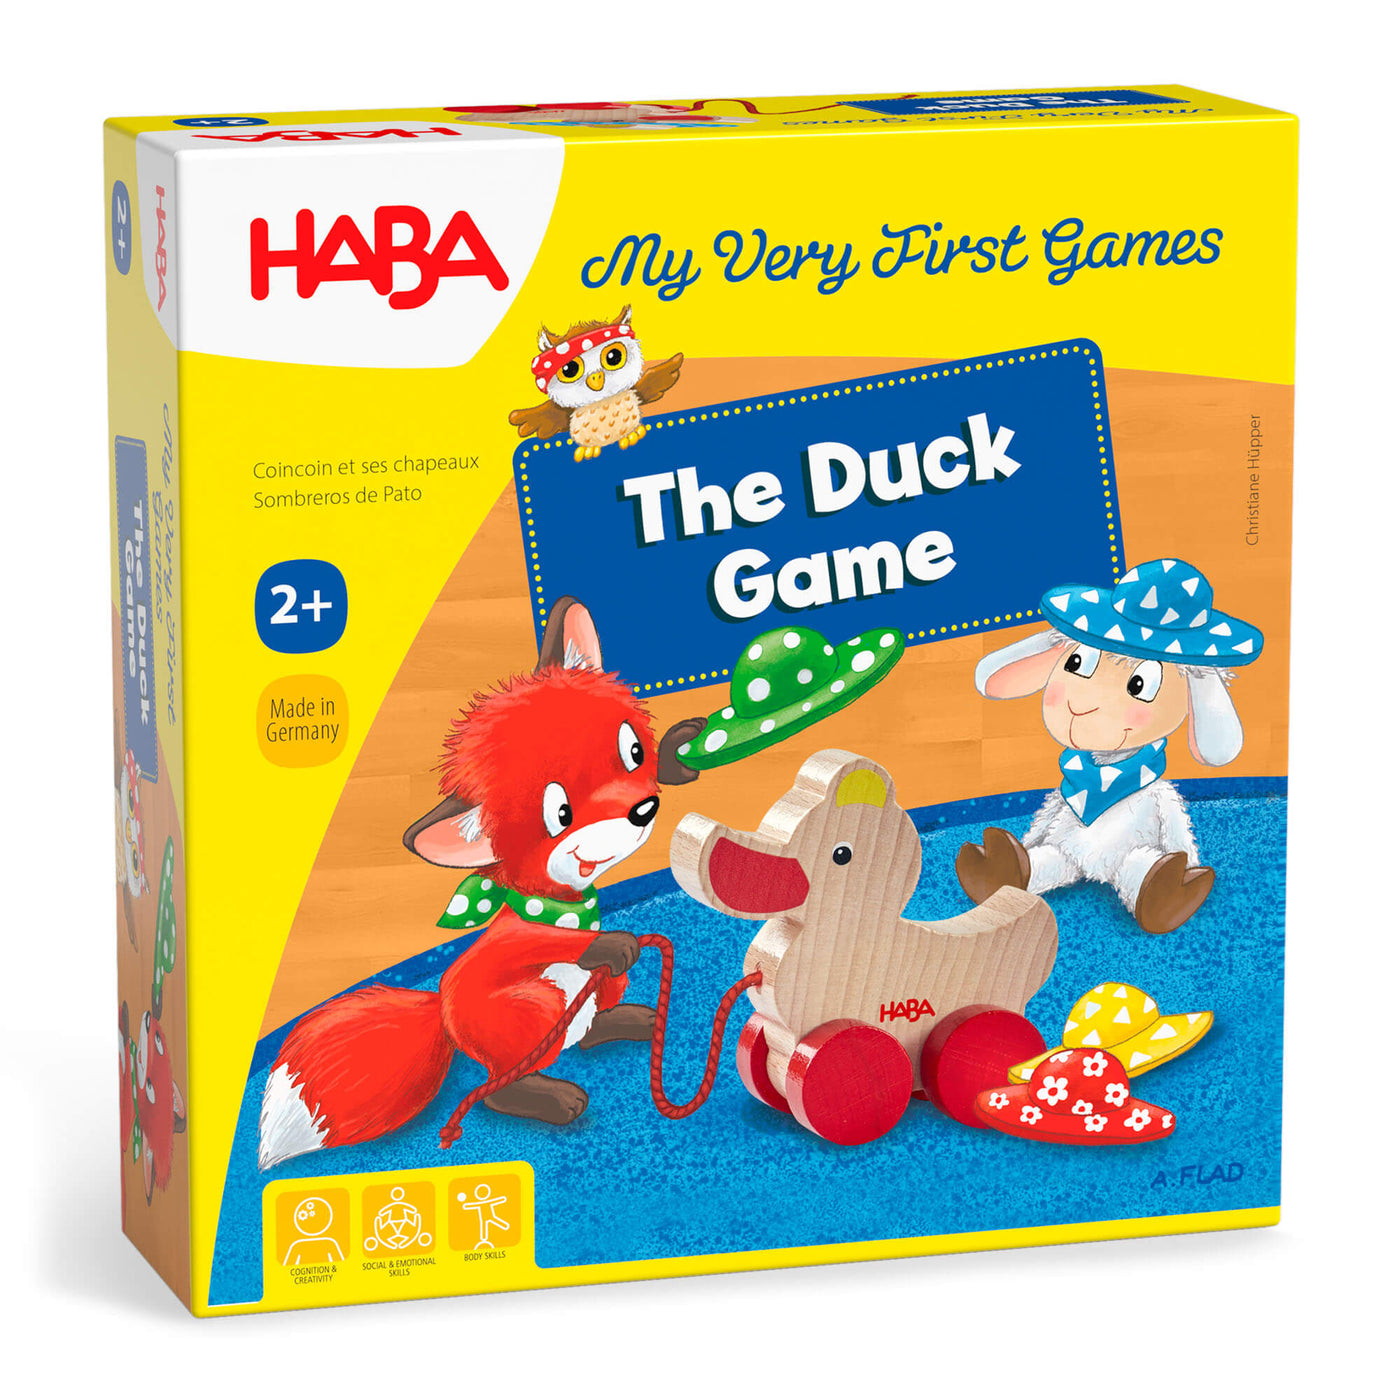 My Very First Games -  The Duck Game